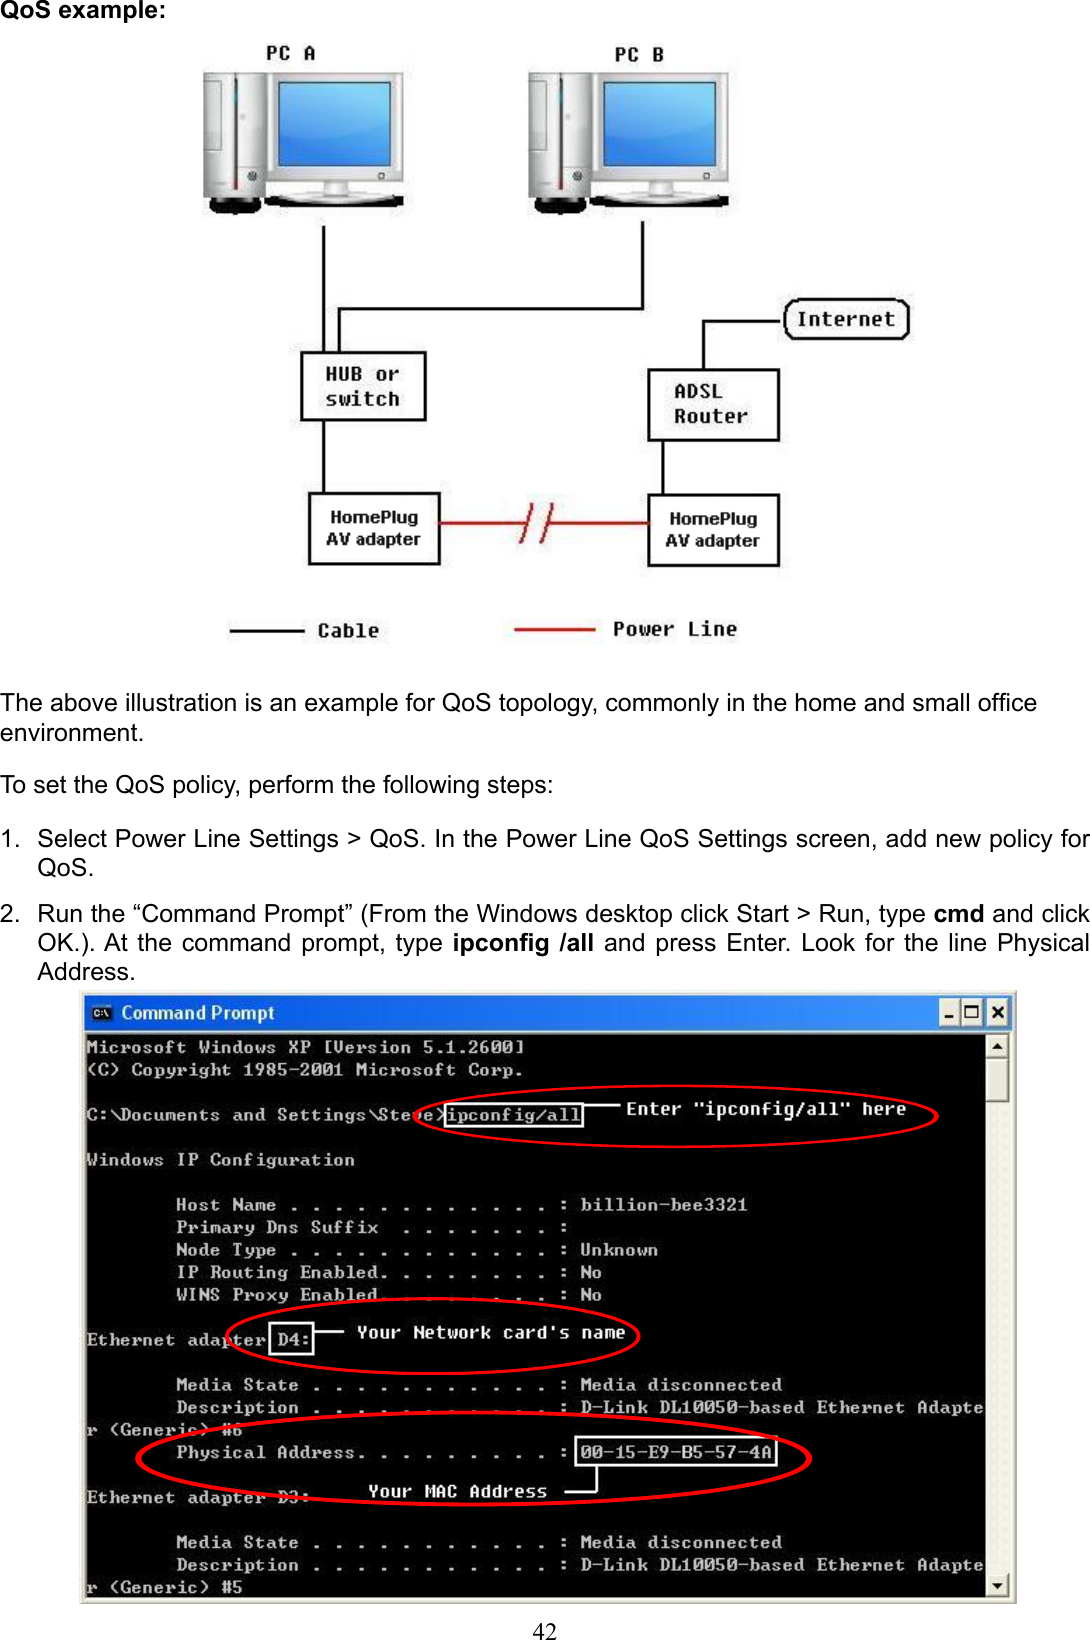 42QoS example:The above illustration is an example for QoS topology, commonly in the home and small ofce environment.To set the QoS policy, perform the following steps:Select Power Line Settings &gt; QoS. In the Power Line QoS Settings screen, add new policy for 1. QoS. Run the “Command Prompt” (From the Windows desktop click Start &gt; Run, type 2.  cmd and click OK.). At  the  command  prompt,  type  ipcong /all  and  press  Enter.  Look  for  the  line  Physical Address.   